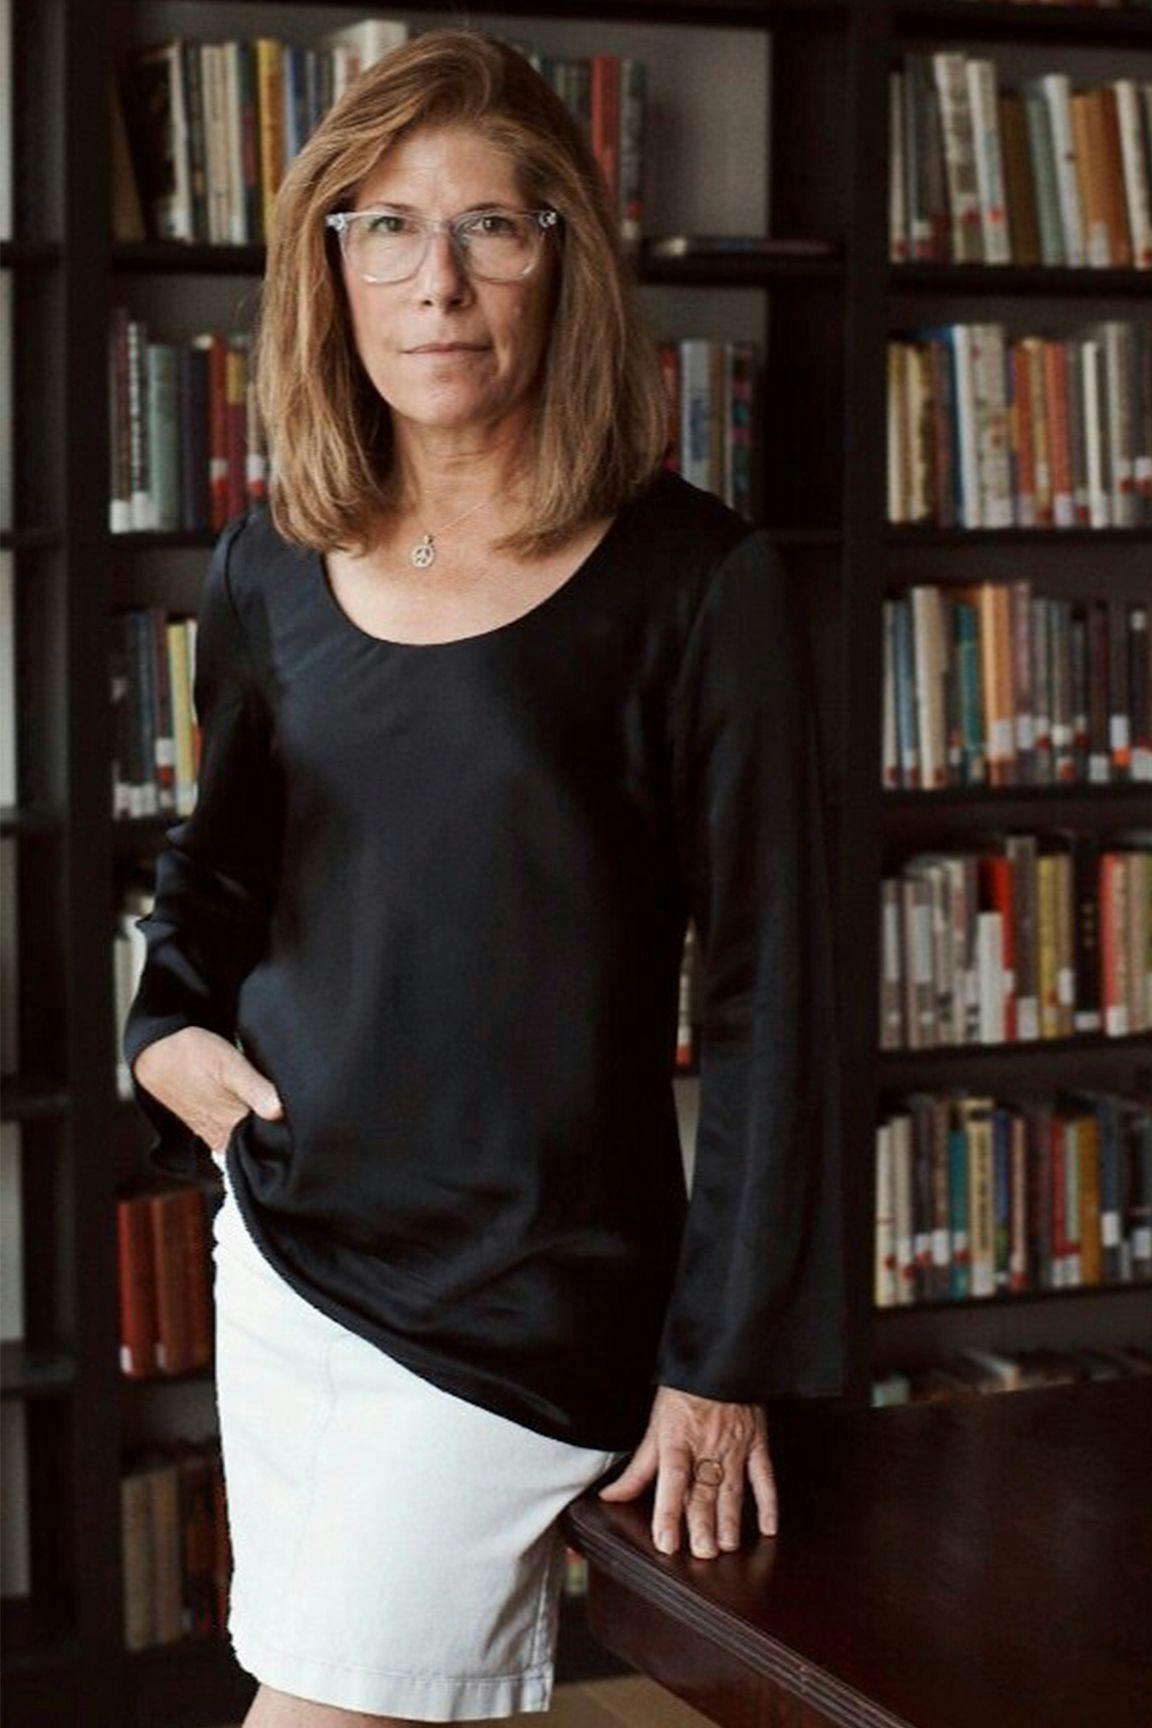 Elizabeth Talerman leaning against a table with bookshelves behind her.